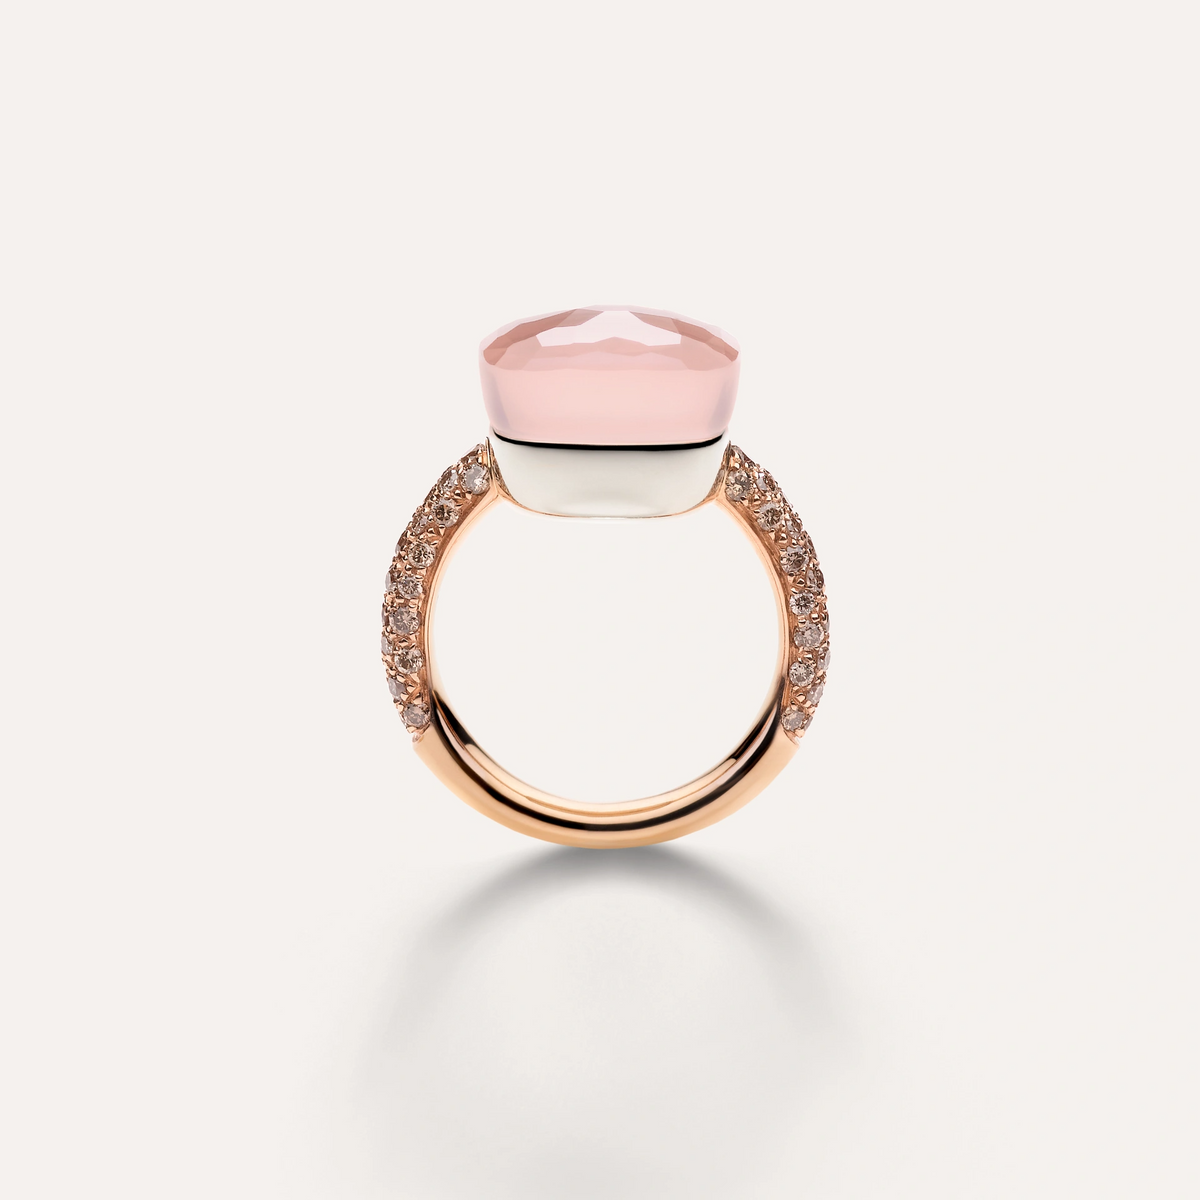 Maxi Nudo ring in 18k rose and white gold with brown diamonds and large Rose quartz